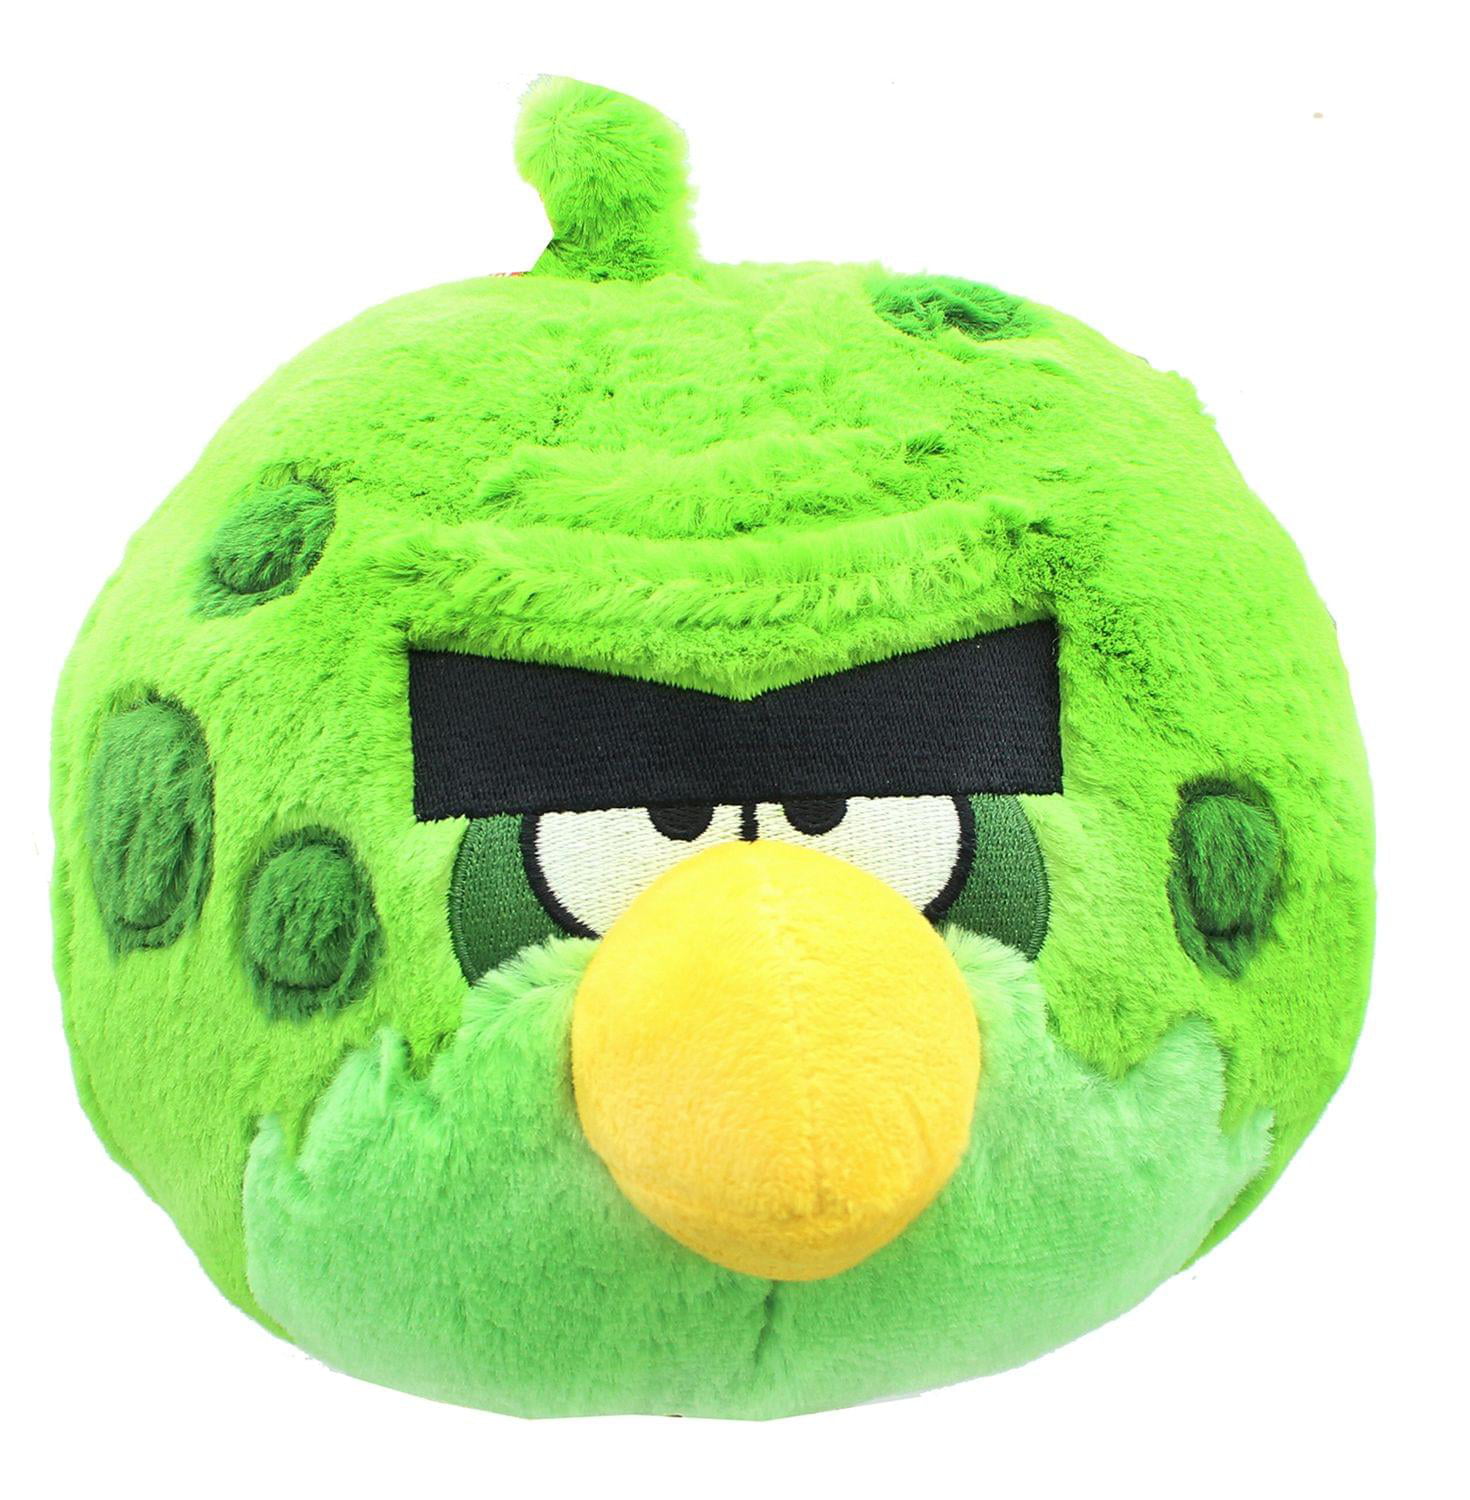 angry birds space plush toys